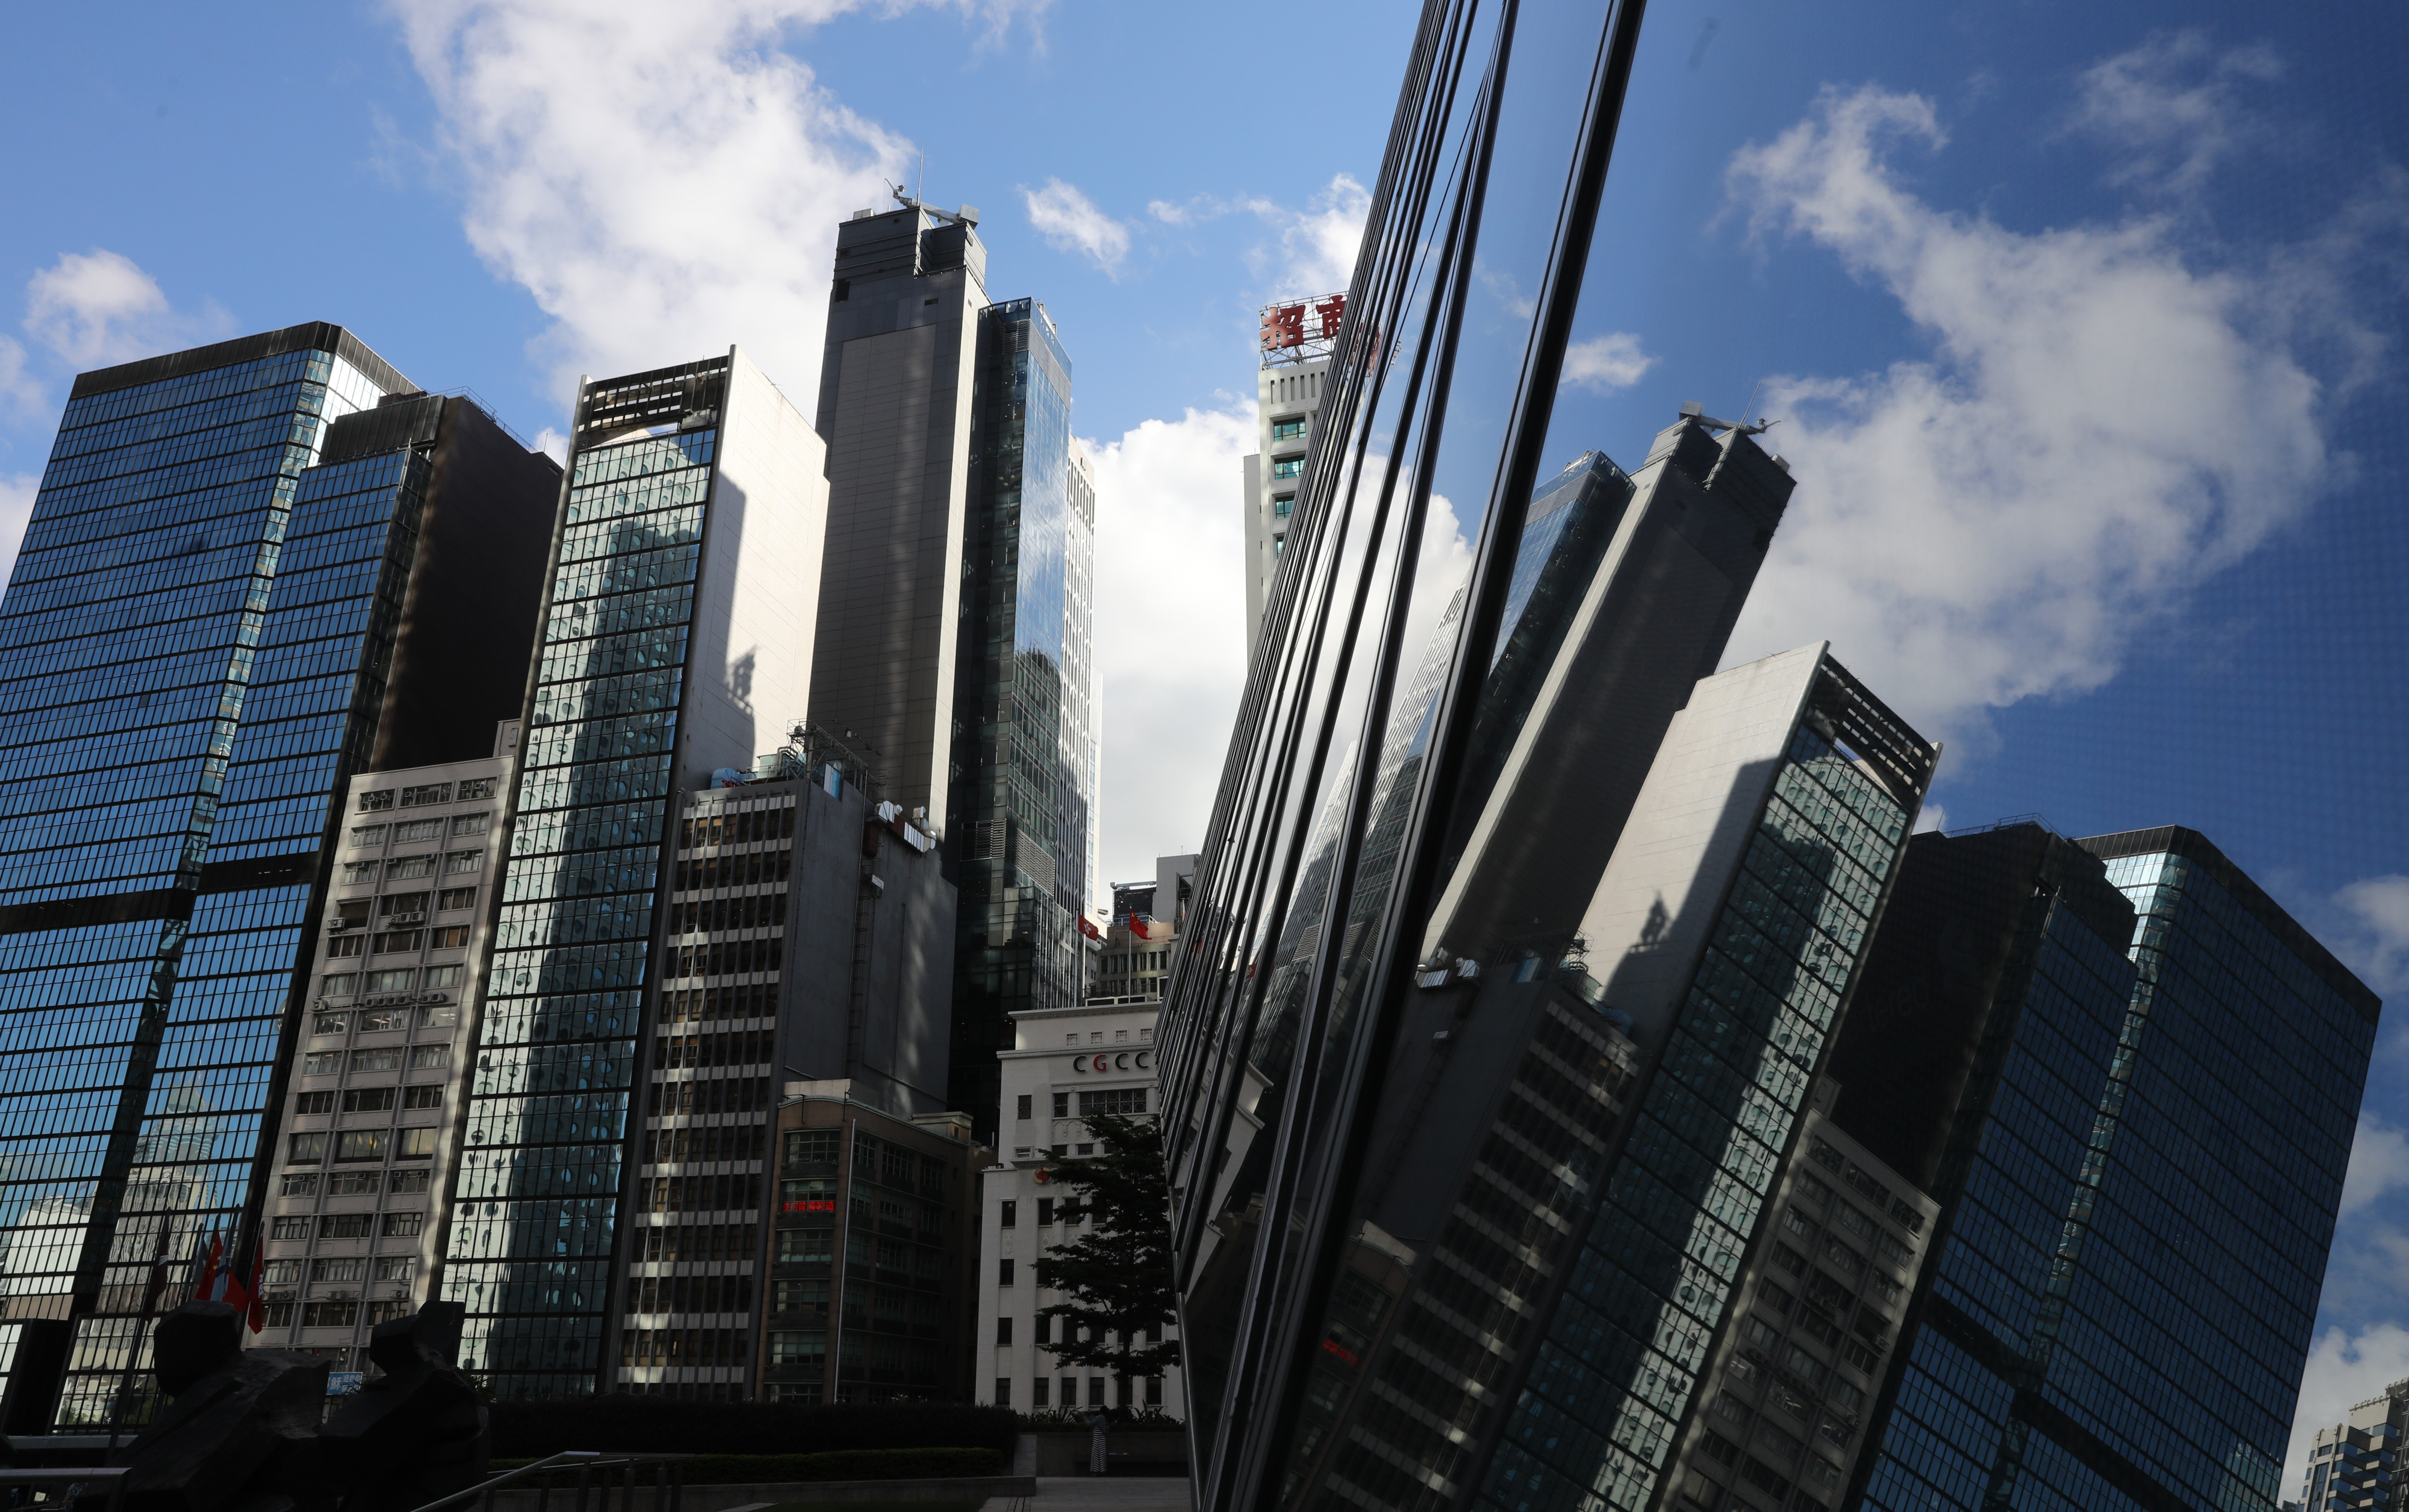 Hong Kong is a premier hub for the free-trade pact although not yet a member, survey respondents say. Photo: Dickson Lee